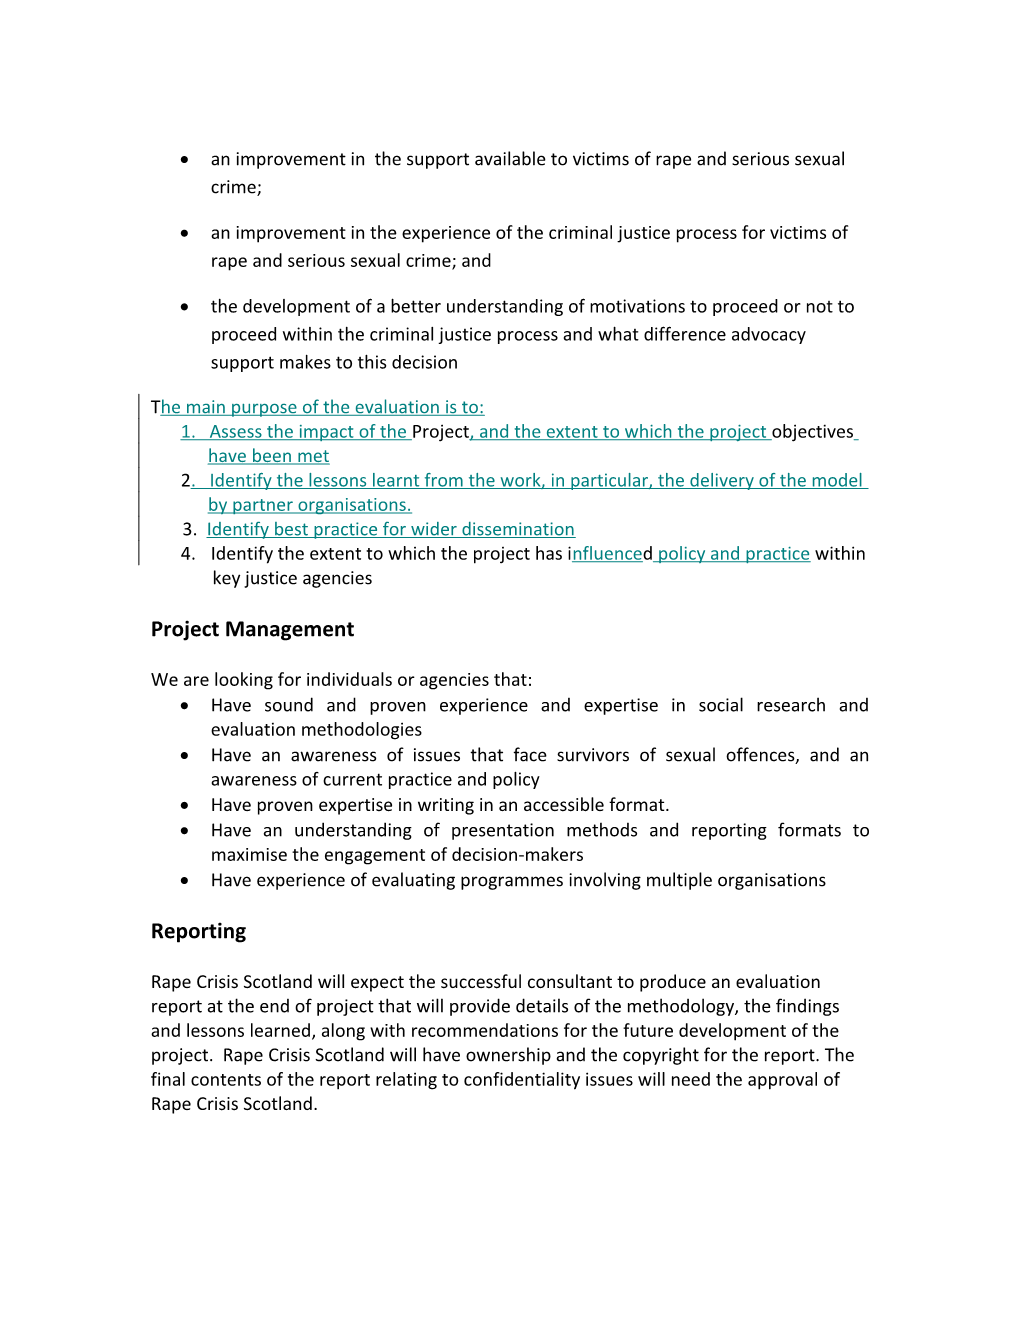 Draft Specification for Feasibility Study Into the Establishment of a National Rape Crisis